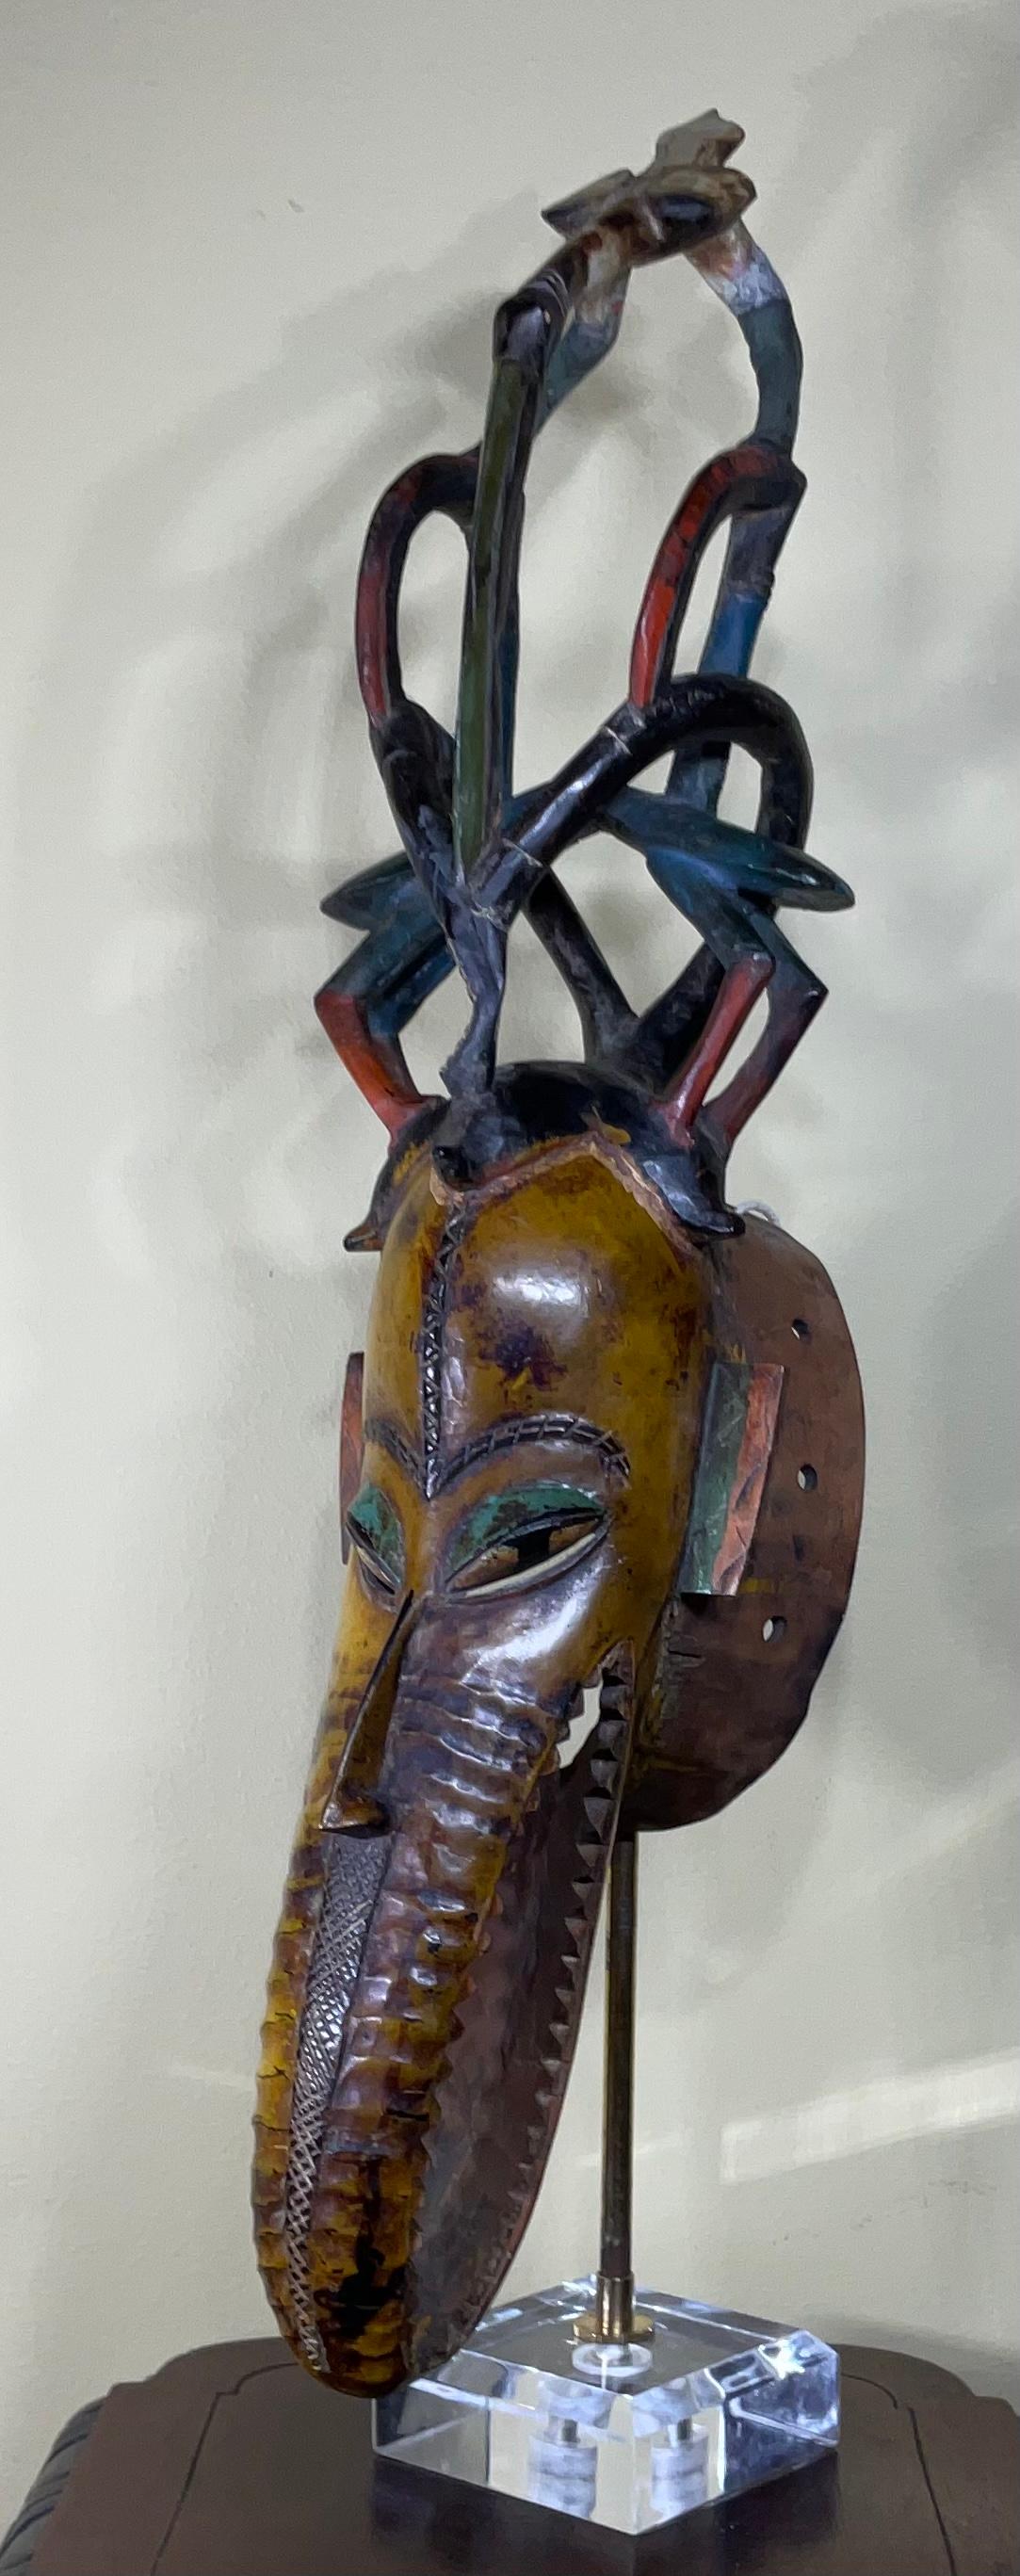 Exceptional artistically hand carved wood mask hand painted made of single piece of wood and was made for decorative purpose. Very intriguing and mysterious face.
The mask in mounted on custom made lucite base.
Size without base is: 6”wide x 7”